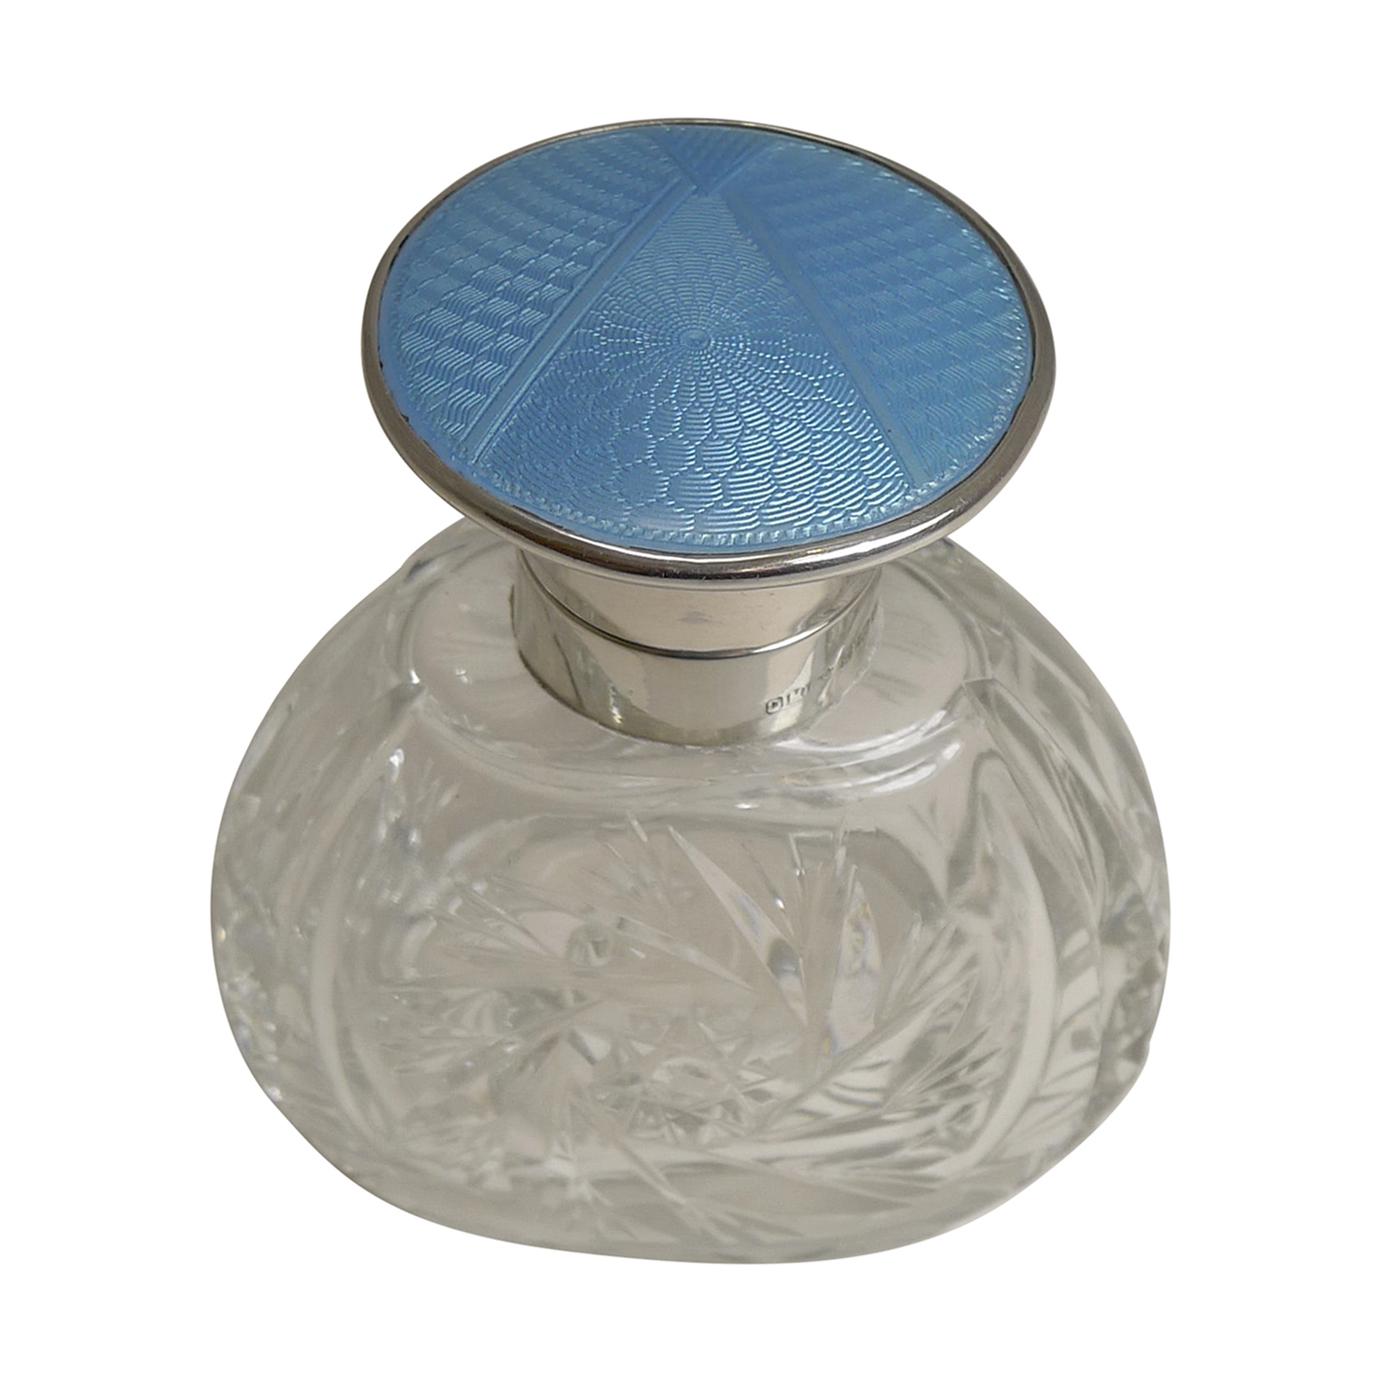 Art Deco Sterling Silver and Blue Guilloche Enamel Topped Perfume Bottle